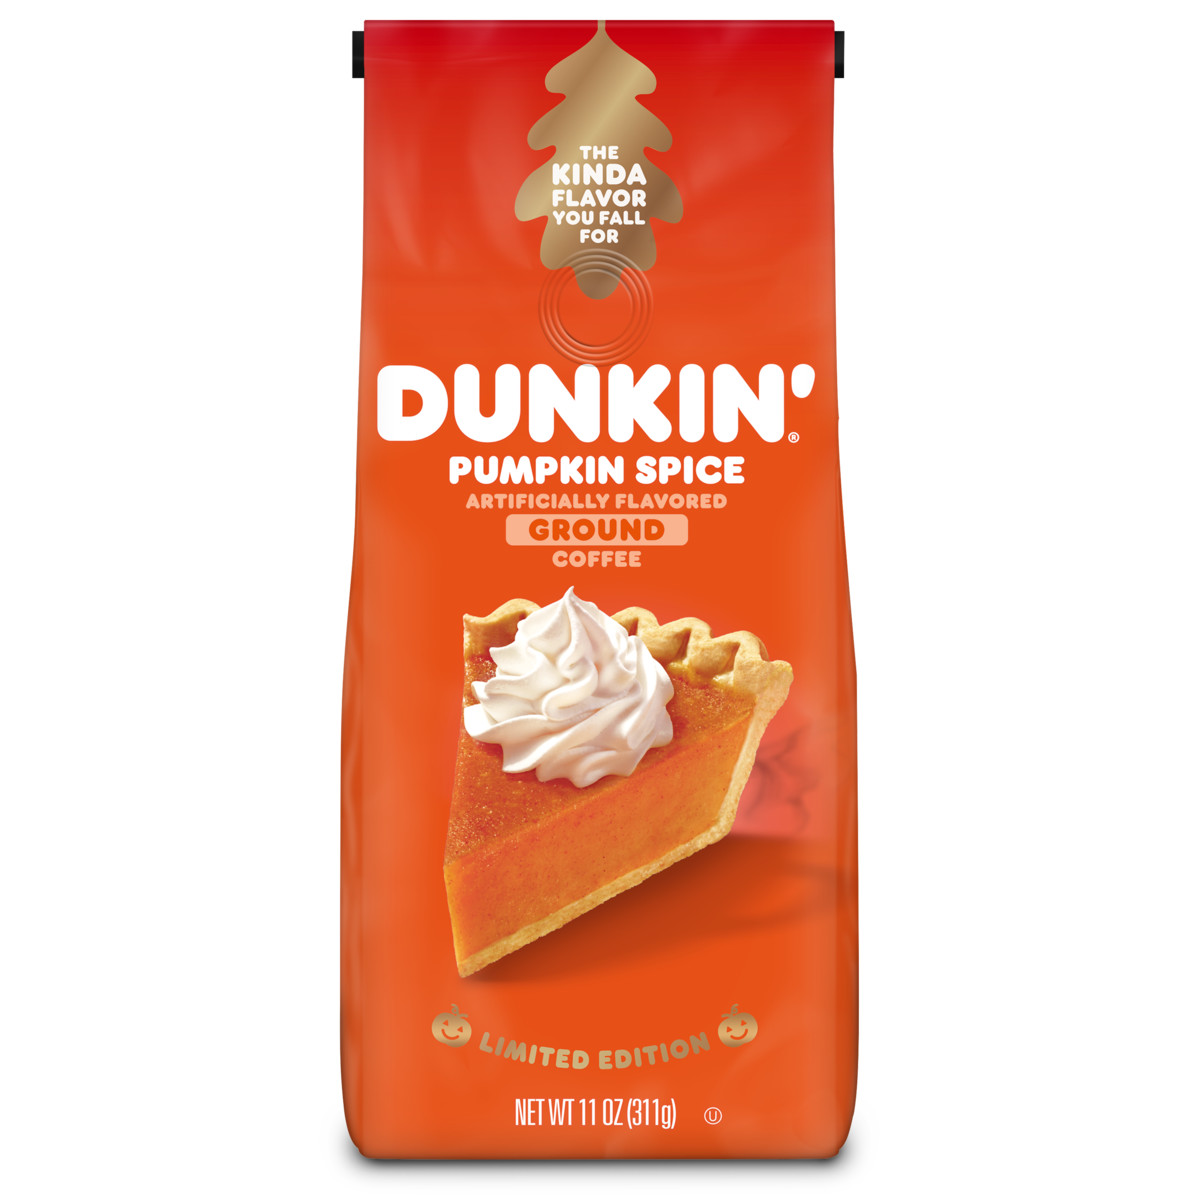 Dunkin' Limited Edition Pumpkin Spice Ground Coffee in an orange bag with an image of a piece of pumpkin pie with whipped cream and a gold leaf on it